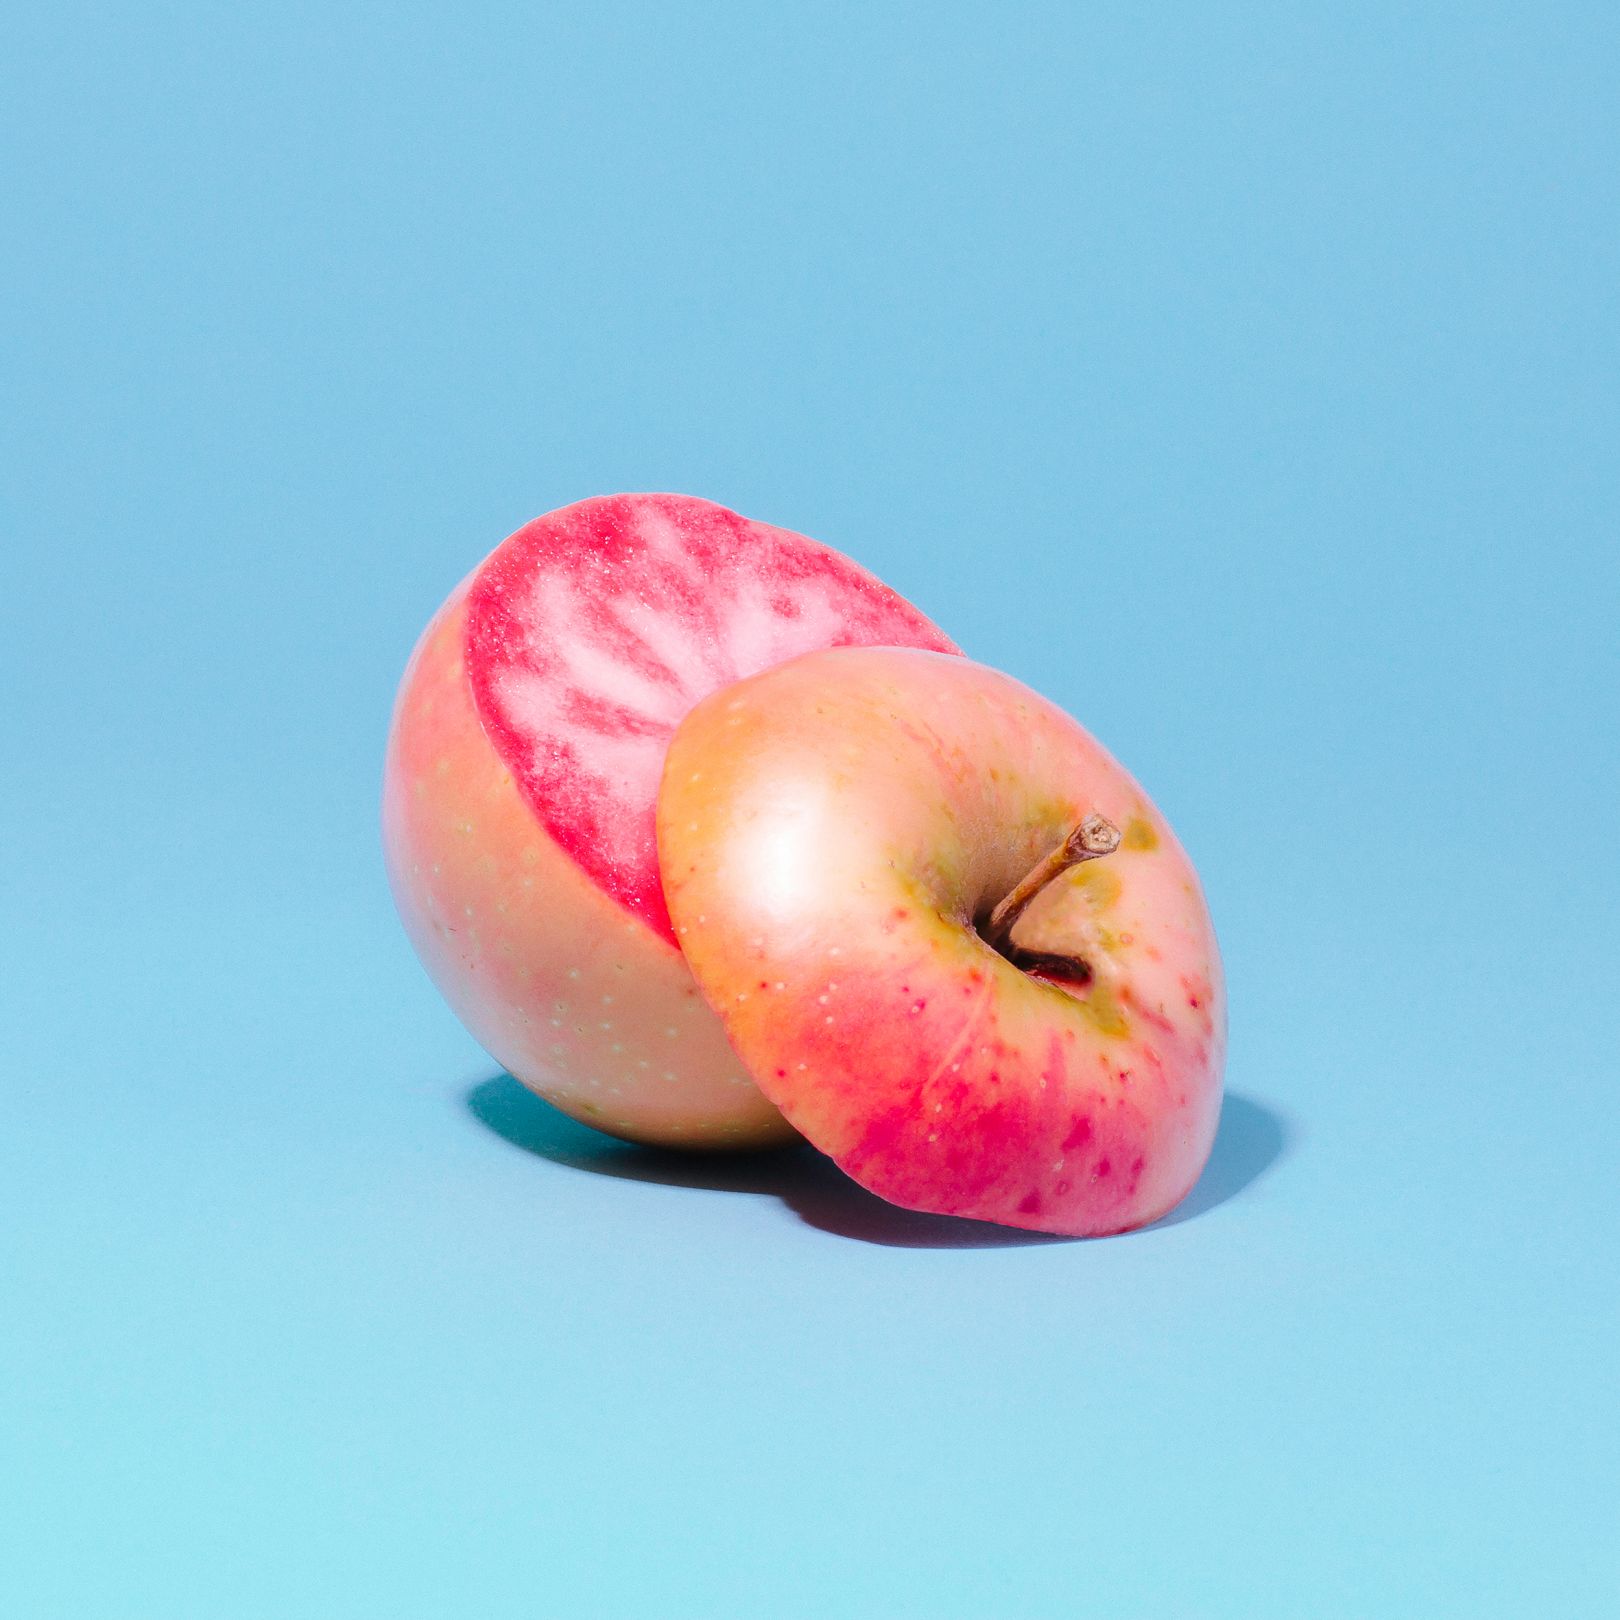 Odd Apples Photographs By William Mullan Of Some Of The World S Strangest Apple Varieties